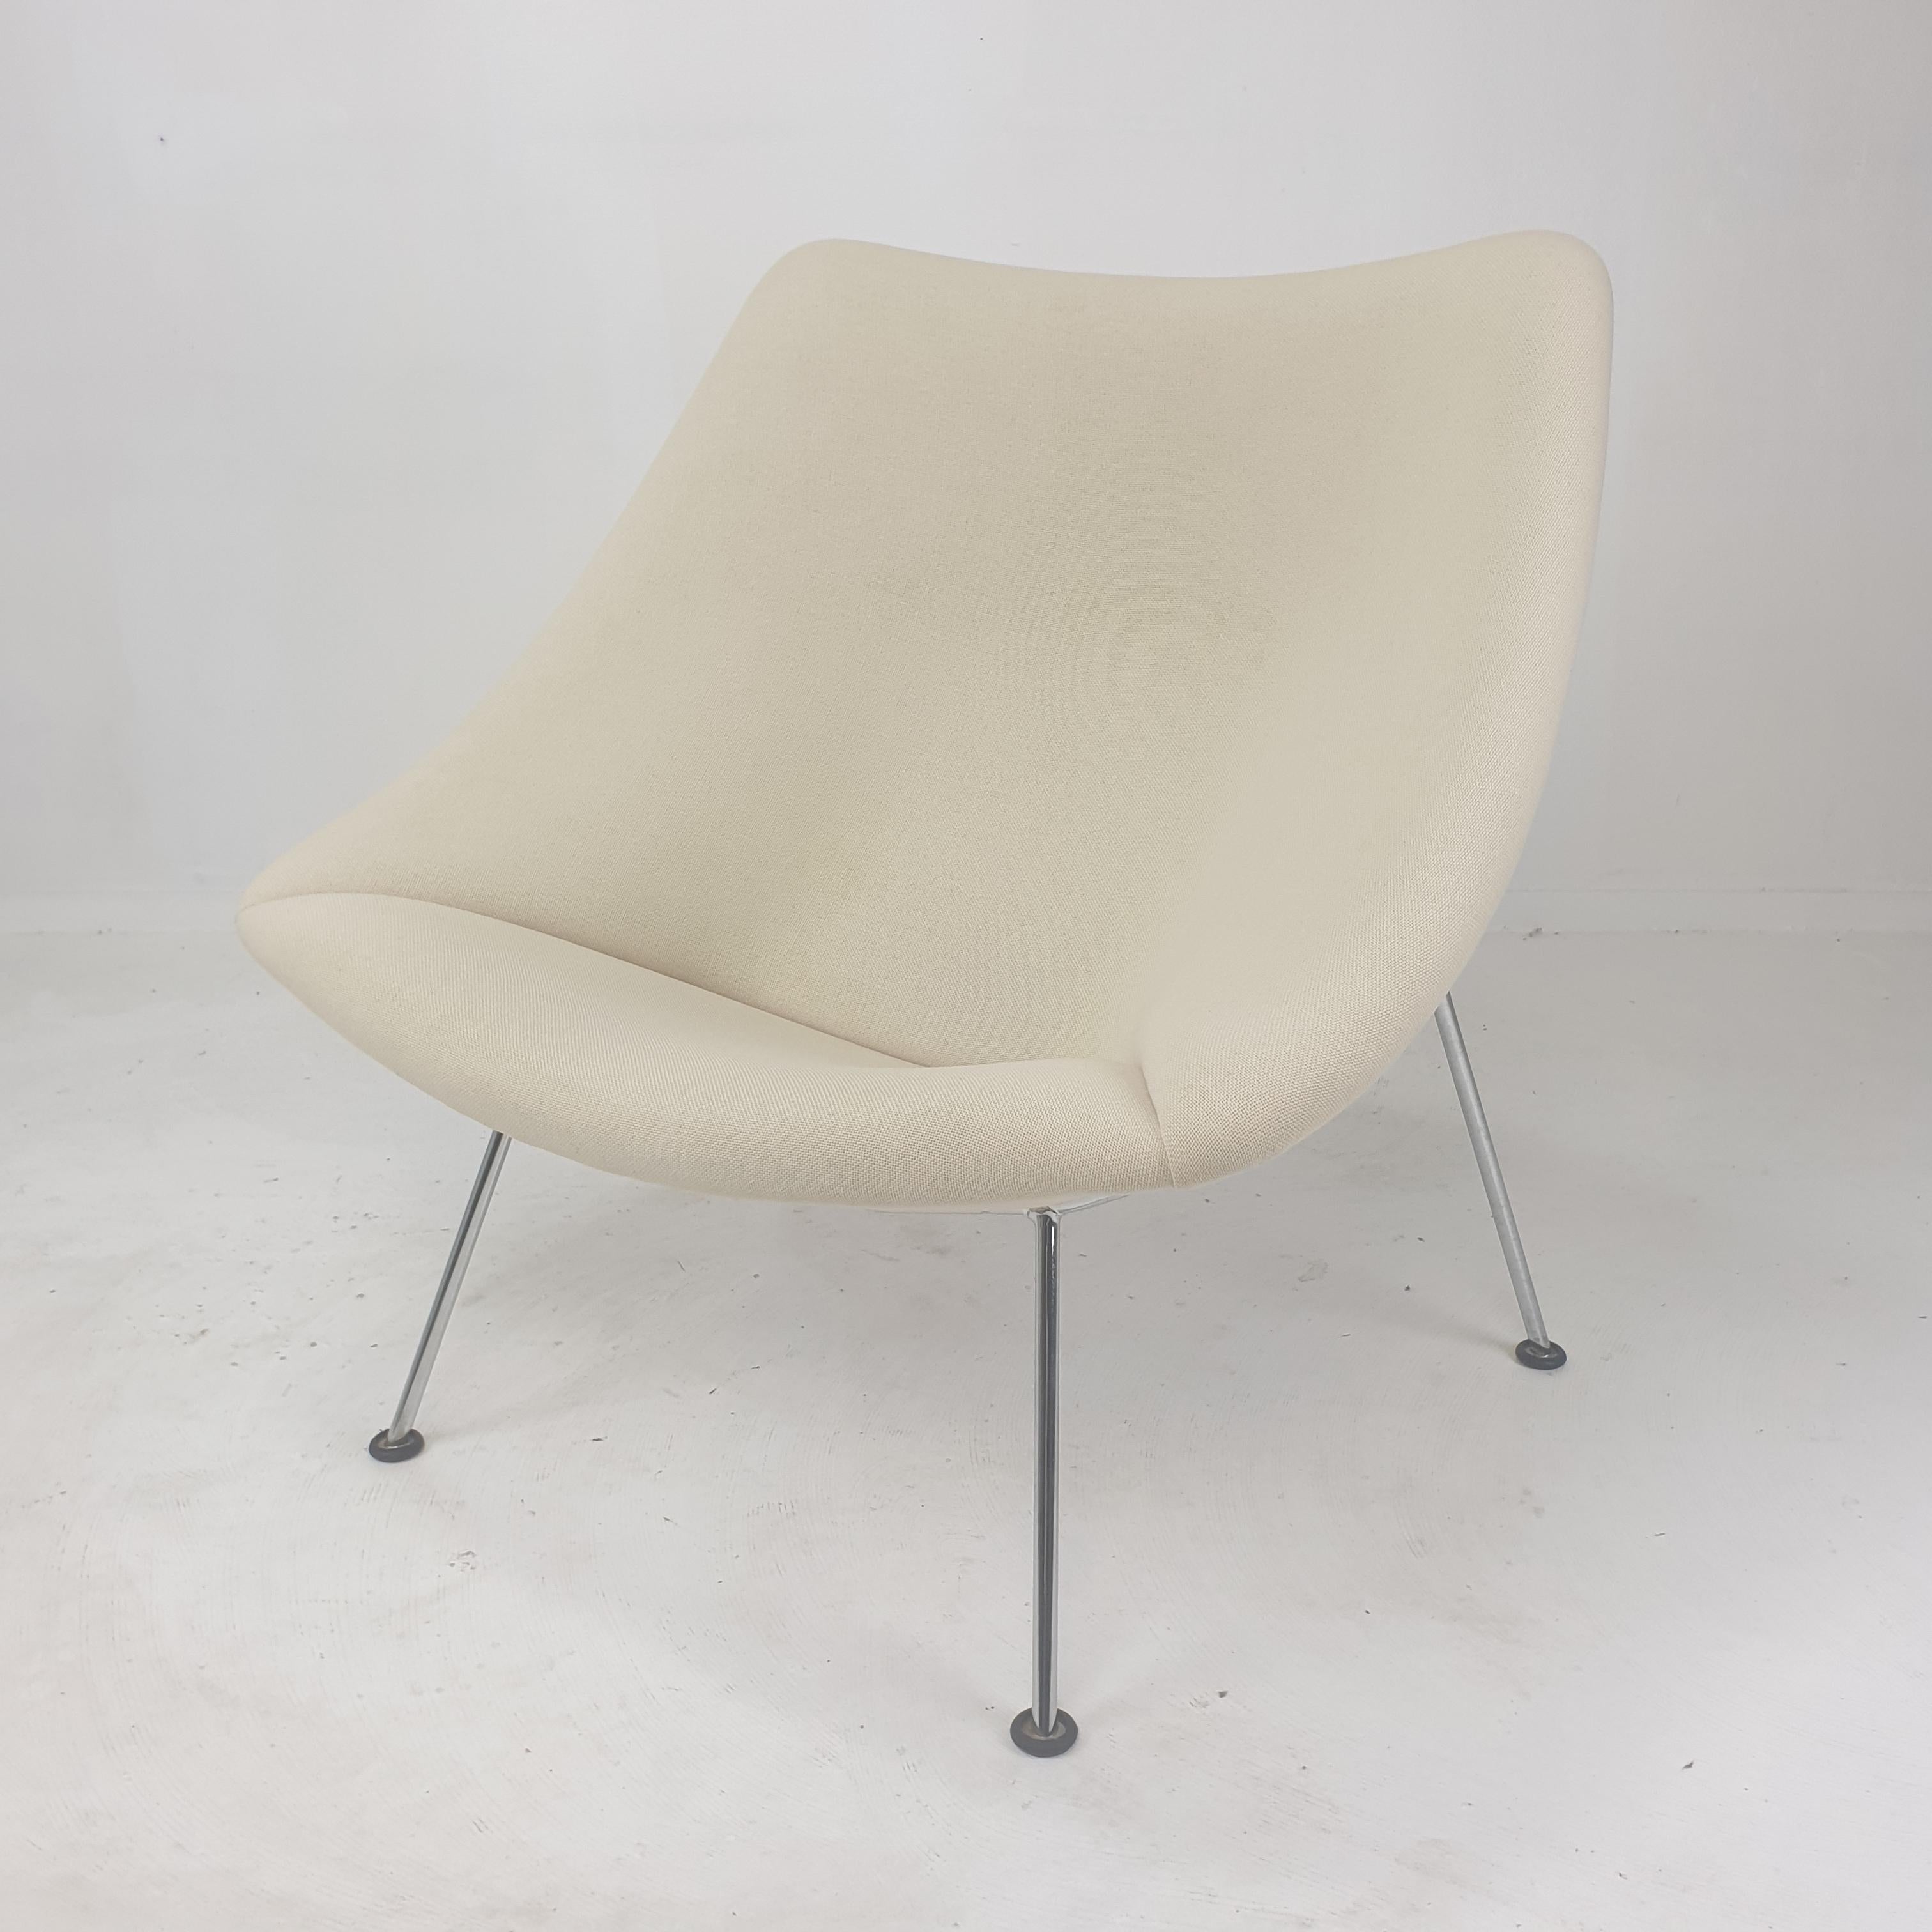 The famous and very comfortable Artifort Oyster Chairs by Pierre Paulin. 

Designed in the beginning of the 60's, this particular set is manufactured in the 80's. 
It has chromed metal legs.

This lovely chair has the original Kvadrat Tonus fabric,